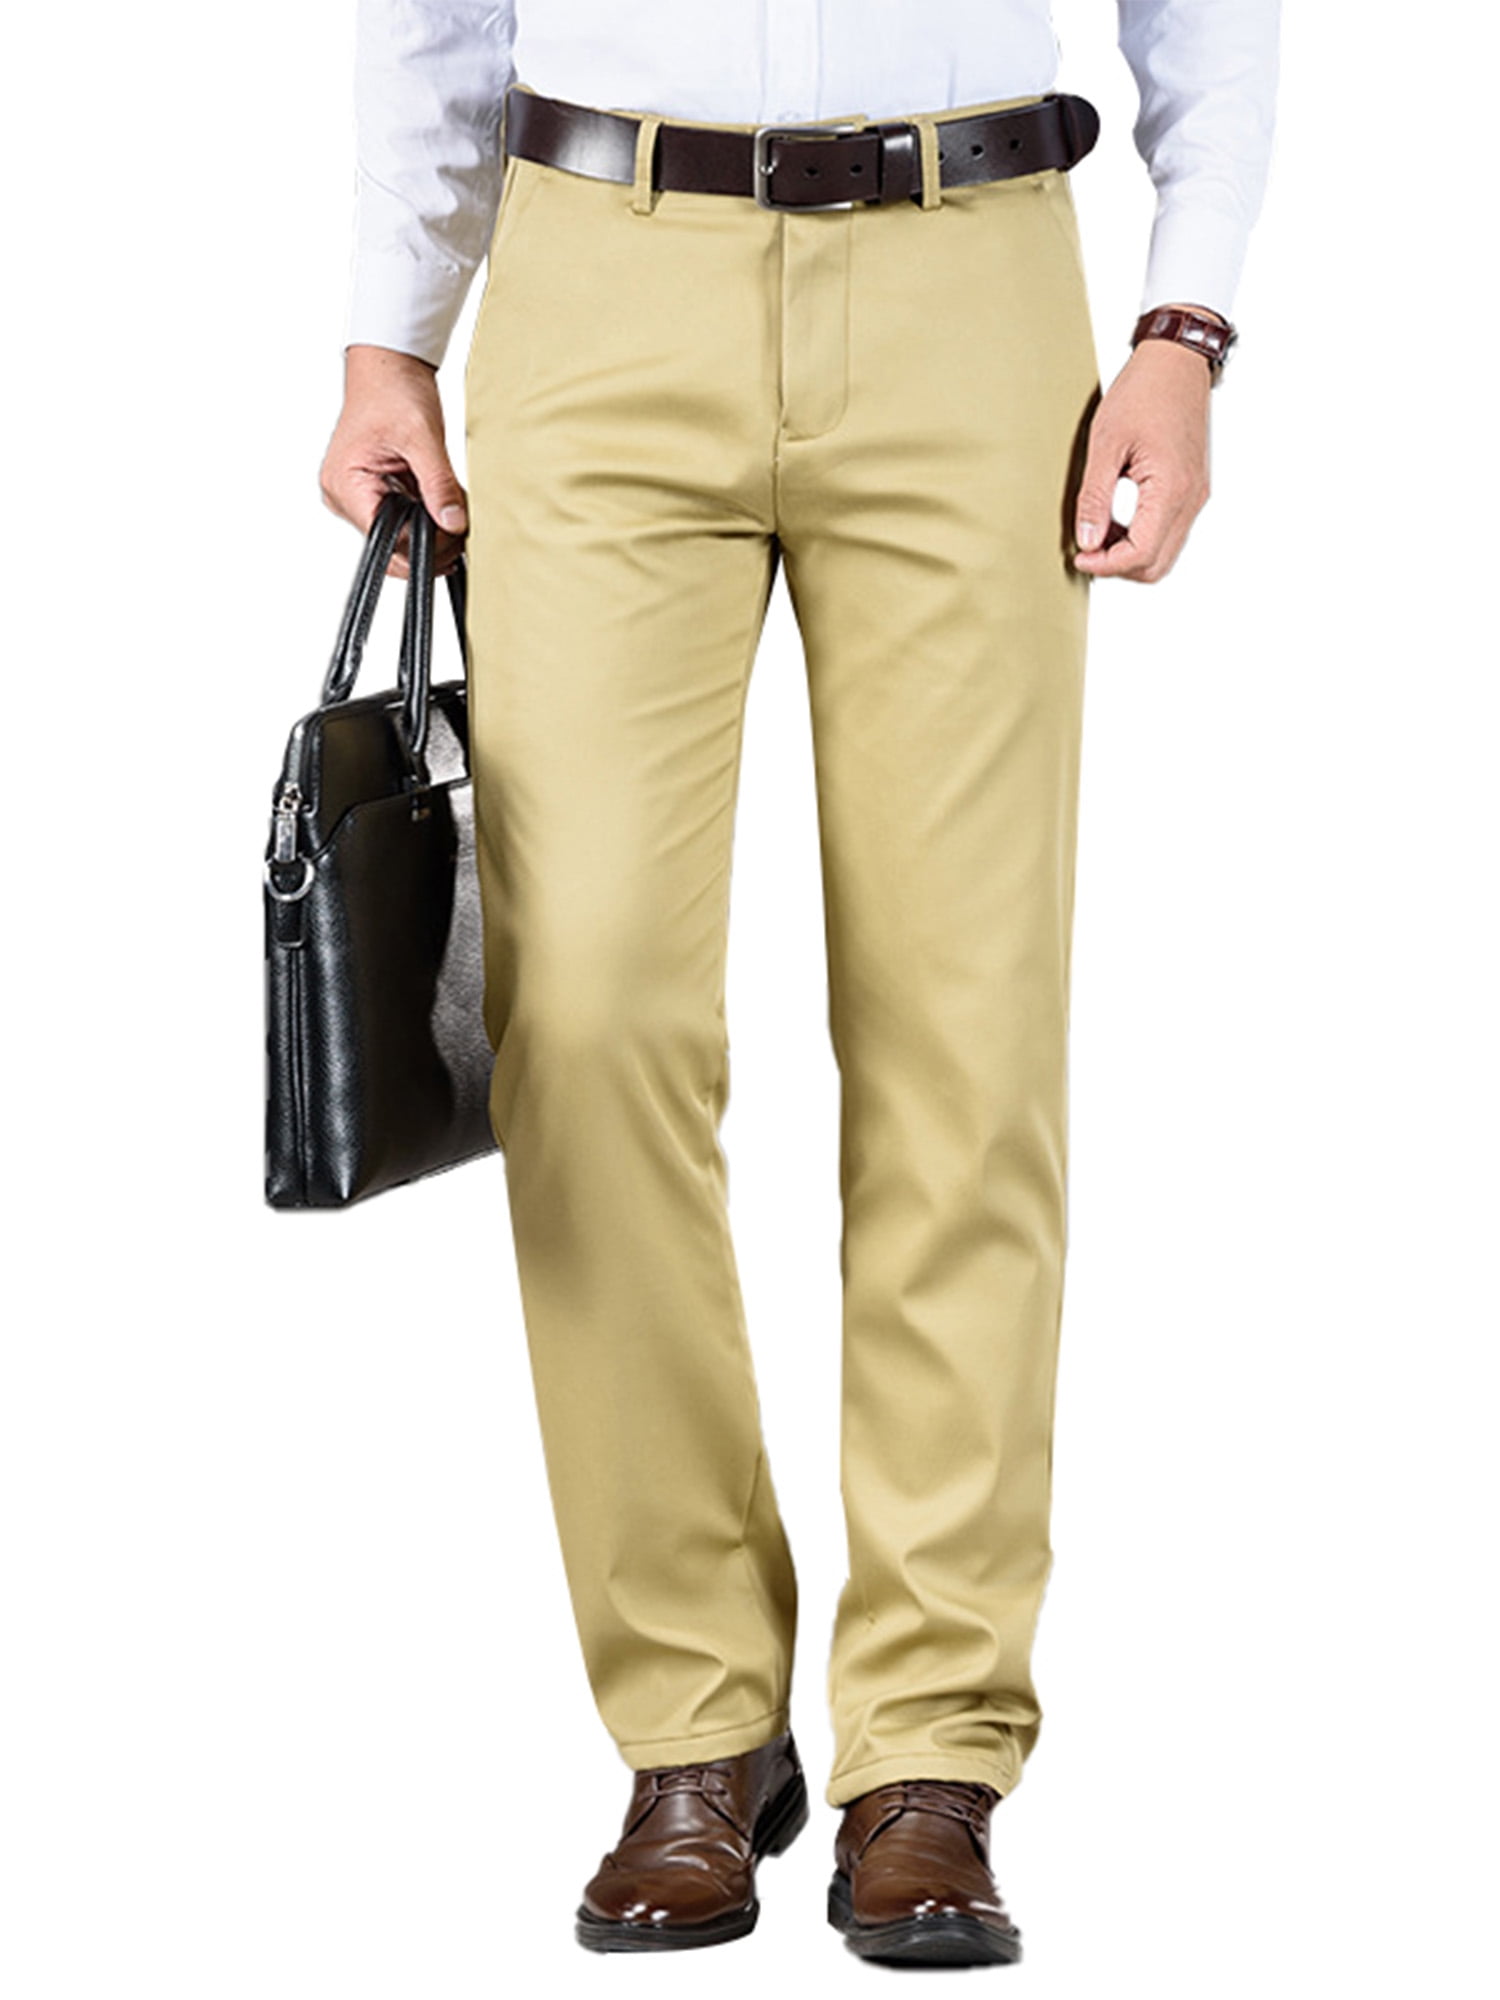 Buy Arrow Newyork Regular Fit Patterned Formal Trousers - NNNOW.com